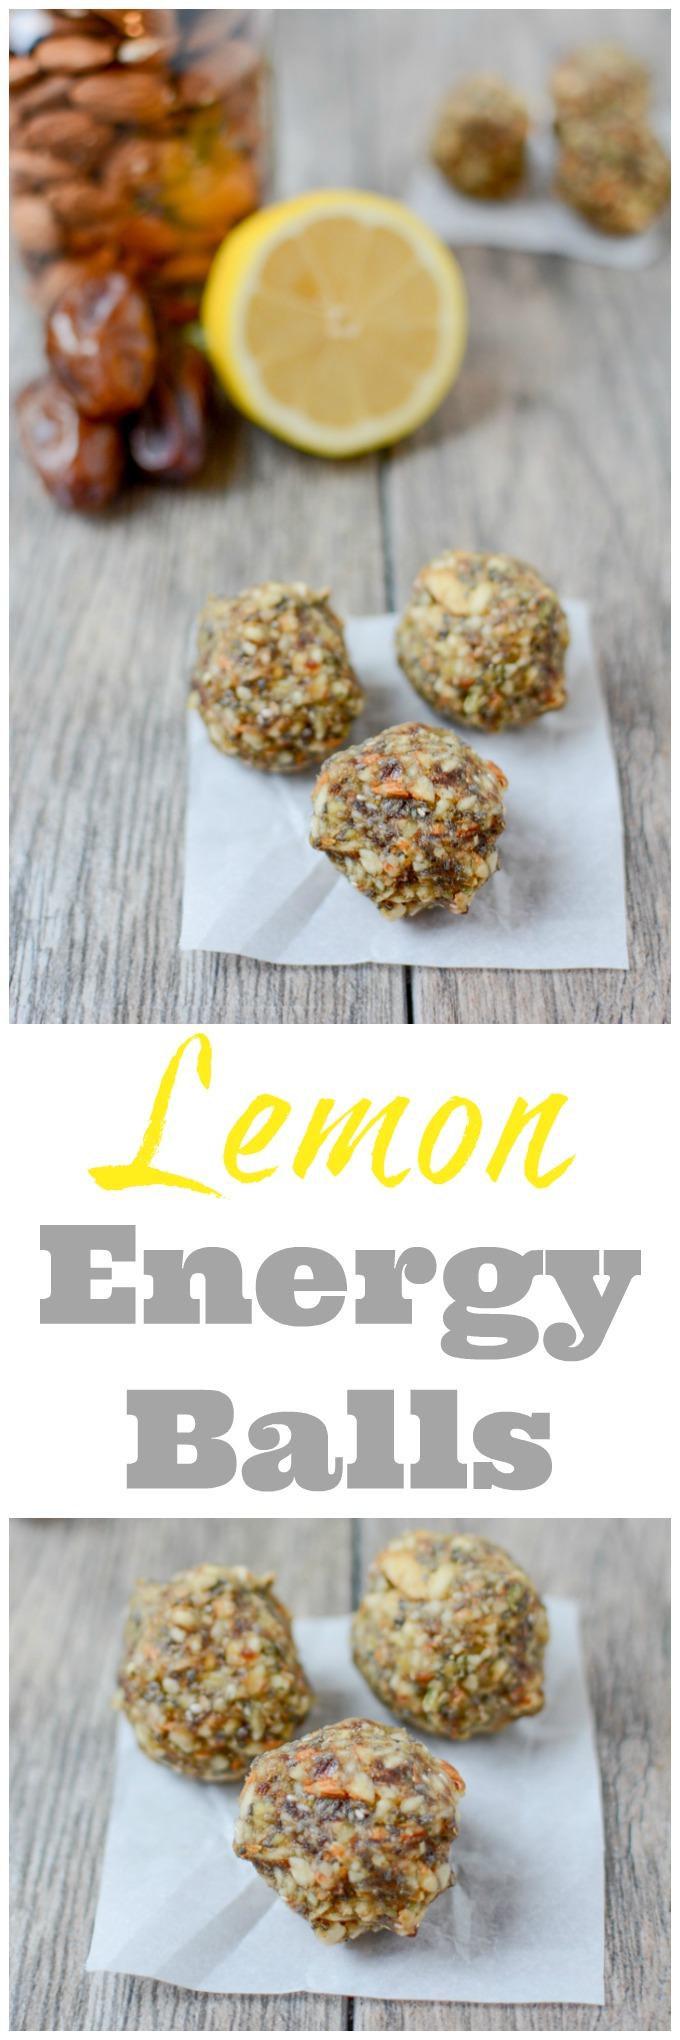 Bursting with citrus flavor, these Lemon Energy balls make the perfect snack. Made with just 5 ingredients, they're gluten-free, paleo-friendly and perfect for stashing in the fridge or freezer!